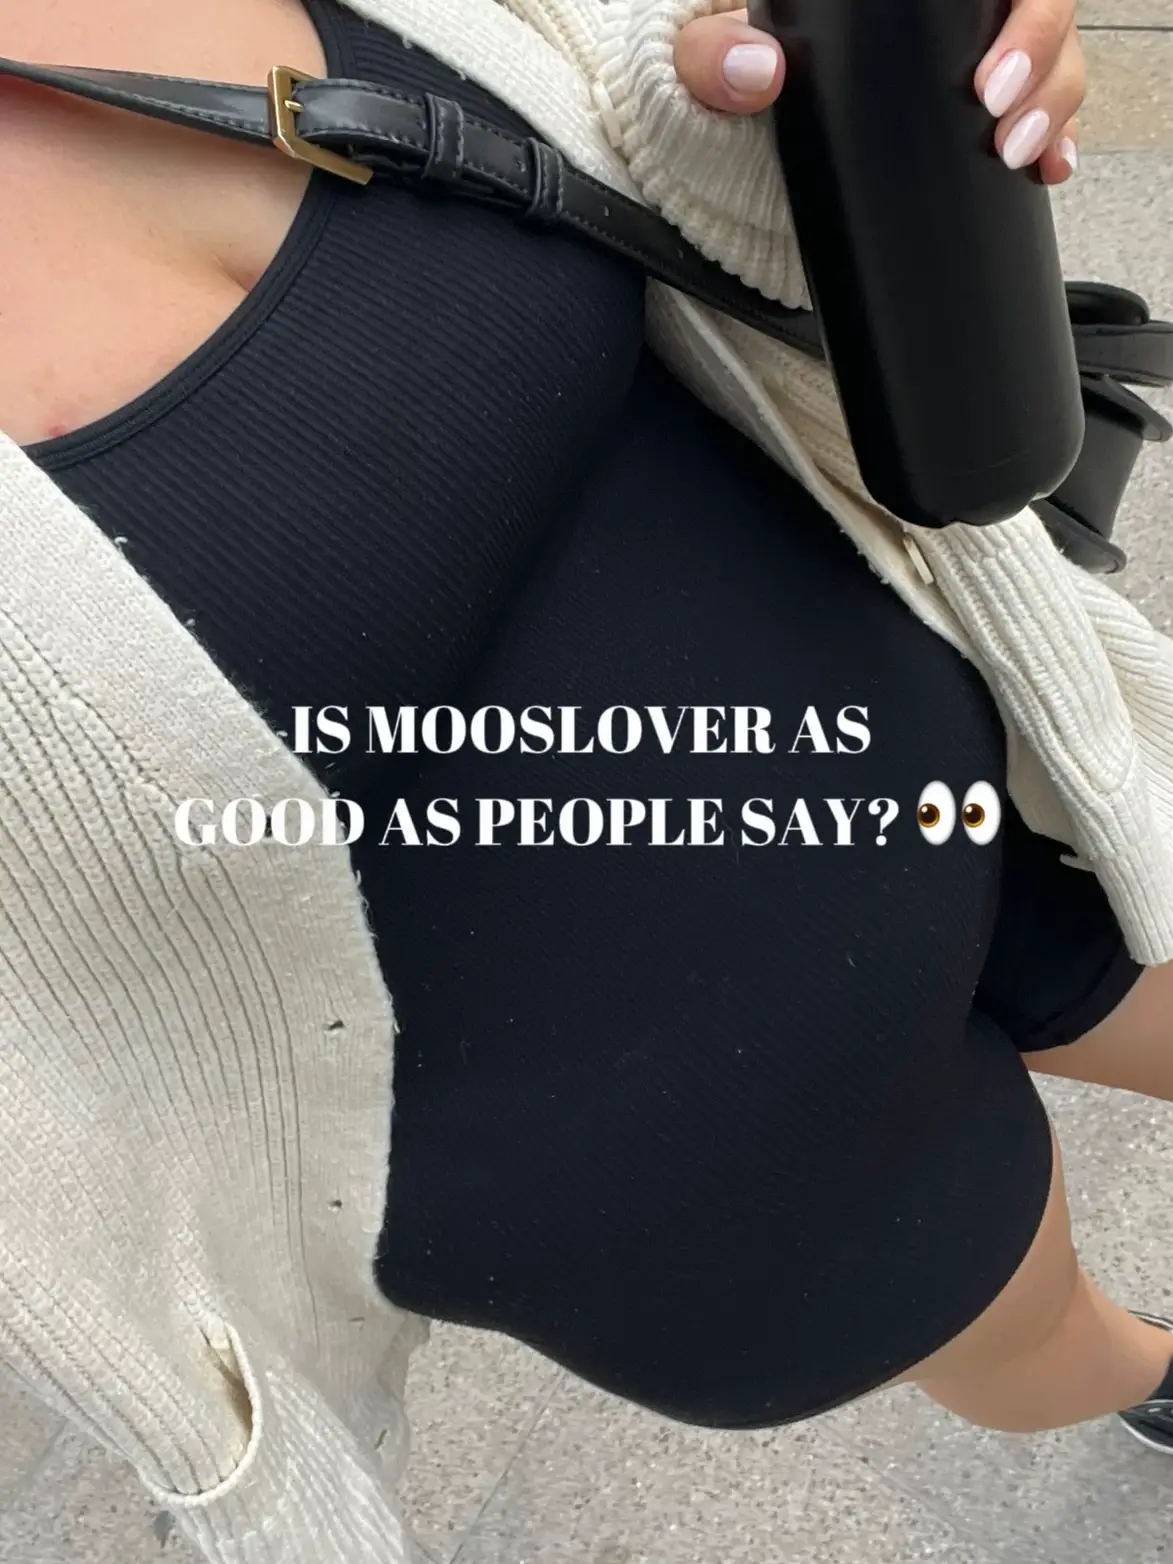 MOOSLOVER HAVE A BRAND NEW BODYSUIT STYLE